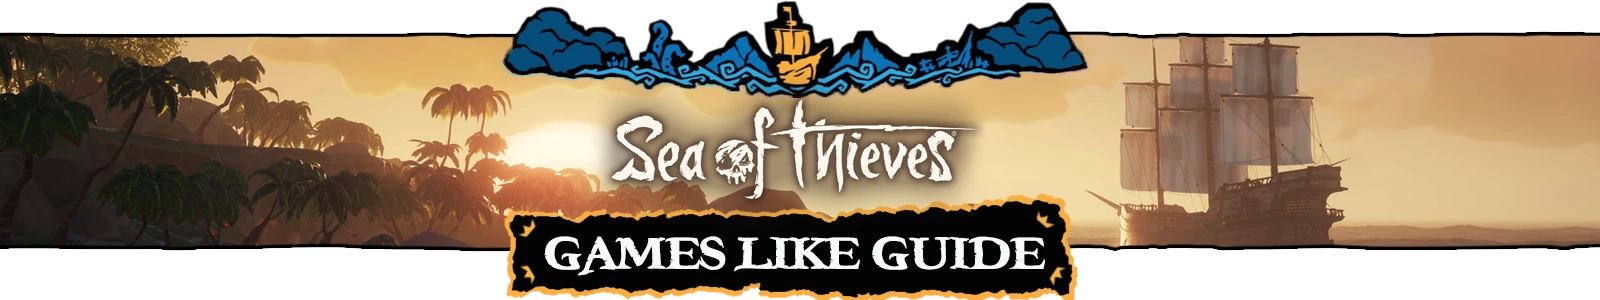 Sea of Thieves games like guide